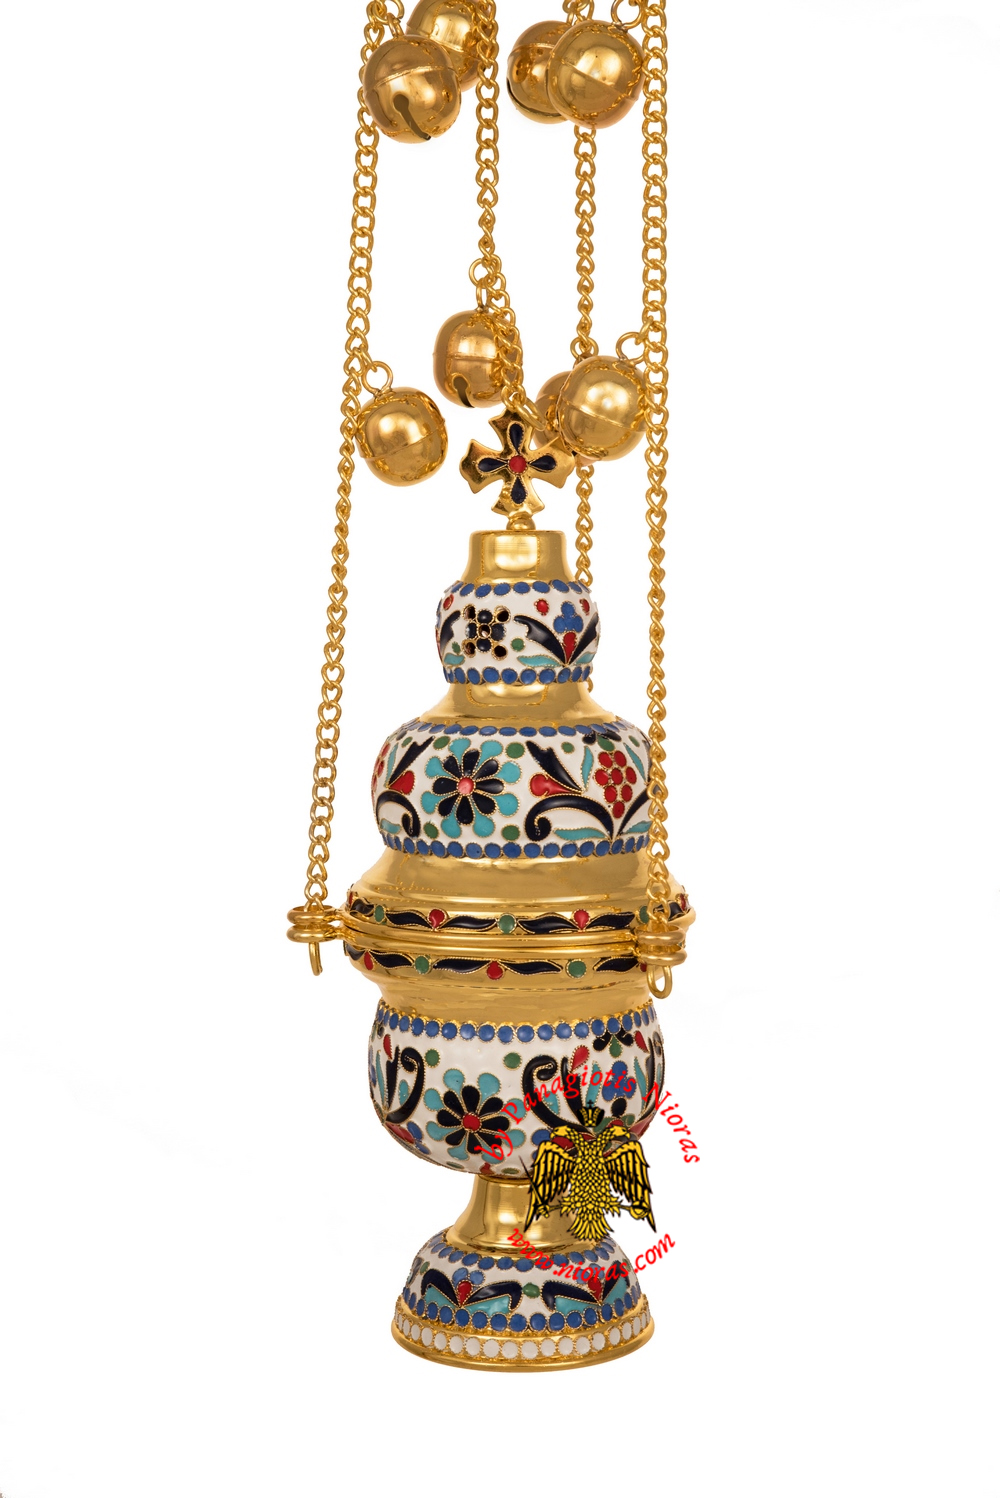 Ecclesiastical Orthodox Censer Athinaiko Style With Enamel Hand Made Gold Plated